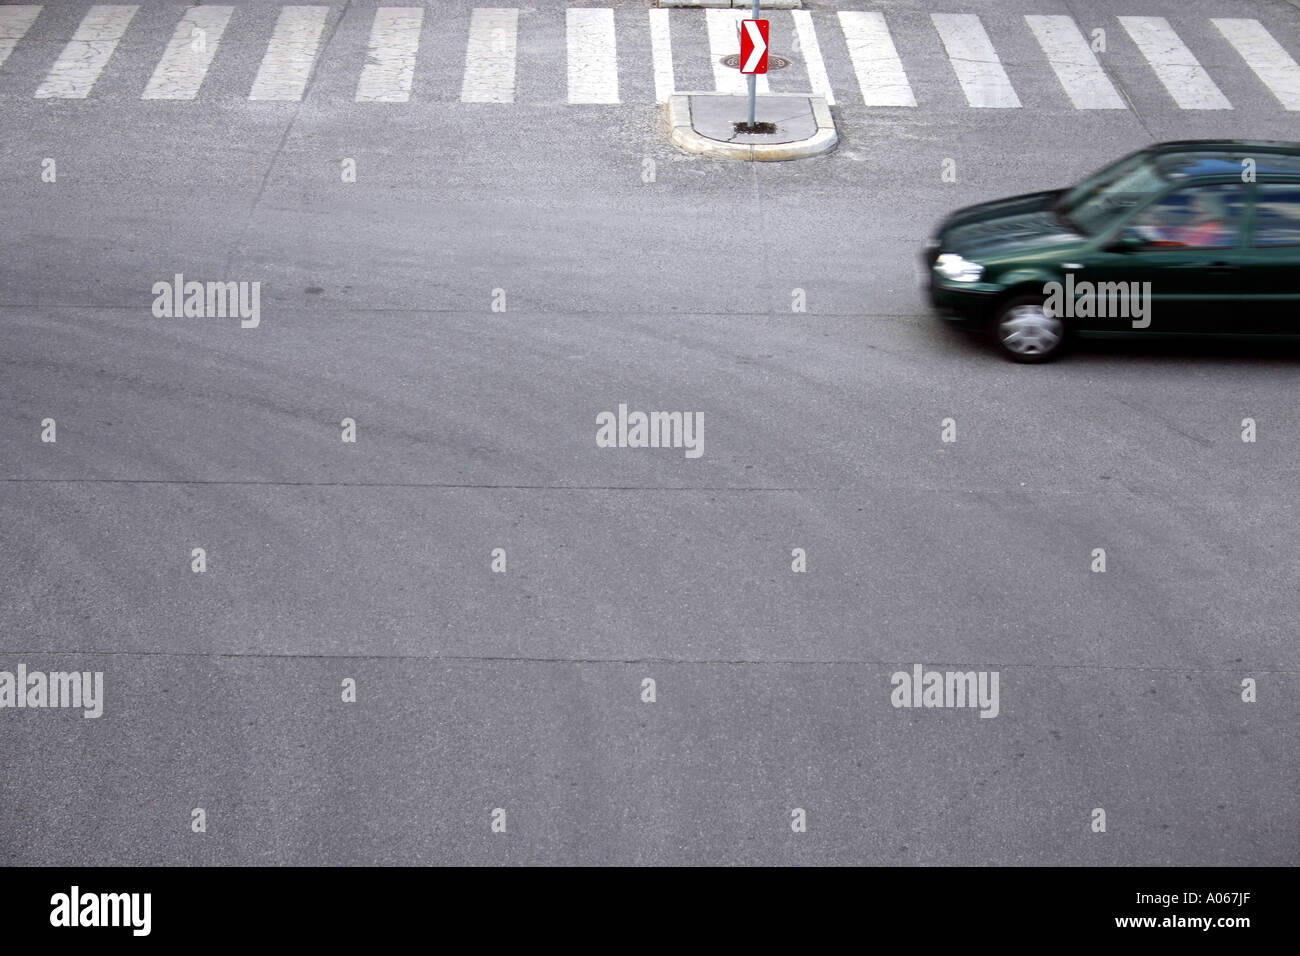 A person driving the car is seen near the zebra crossing Stock Photo